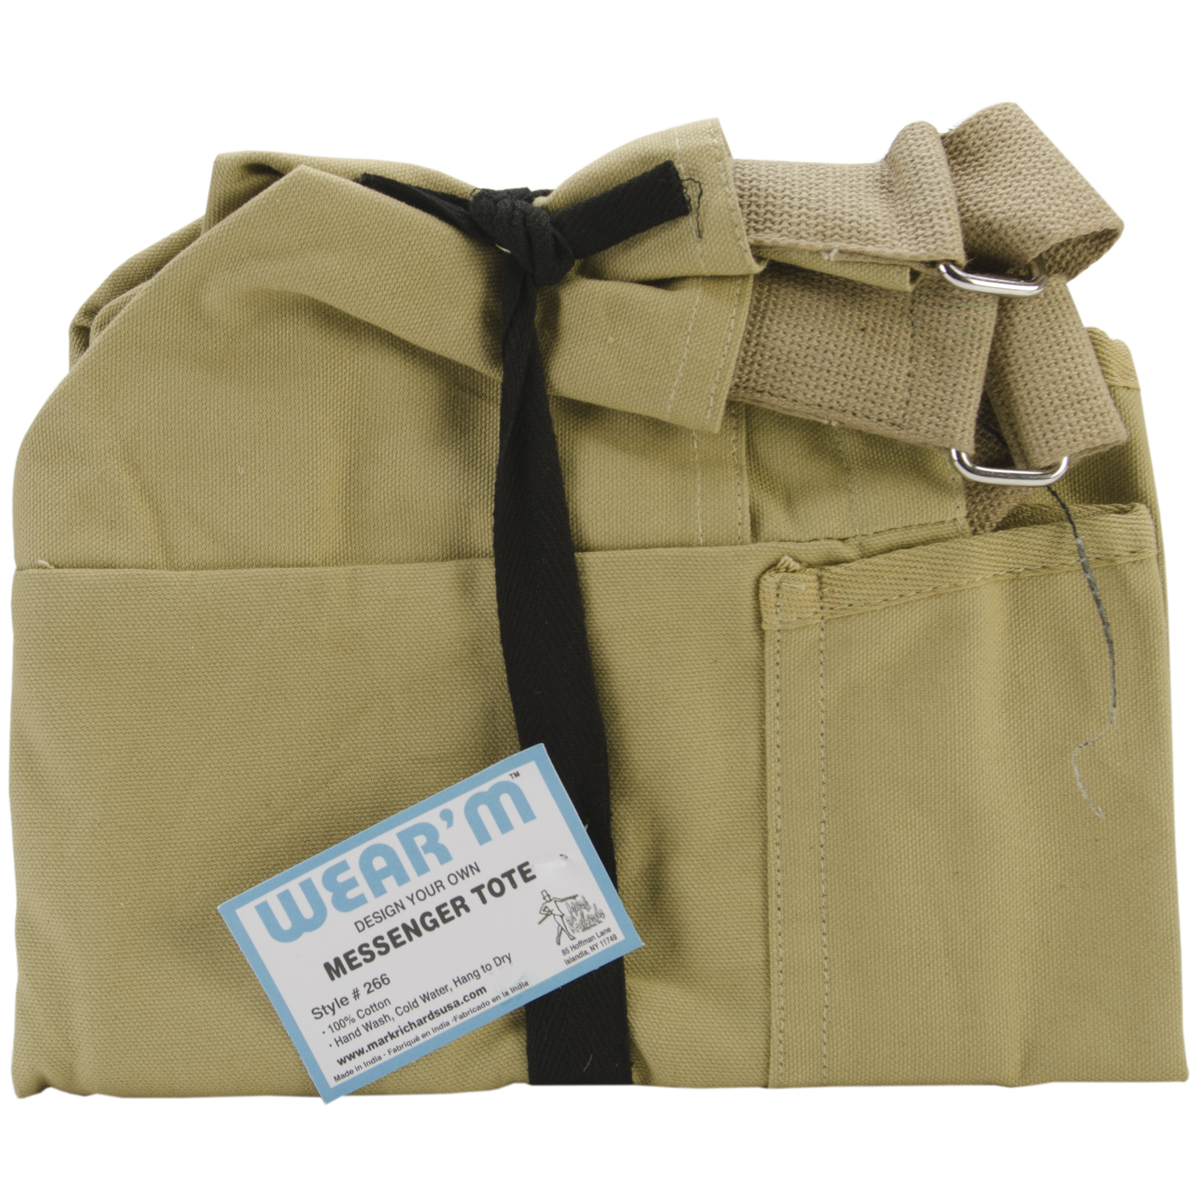 Mrmt-265 Messenger Tote - Olive, 12 X 12 X 4 In.